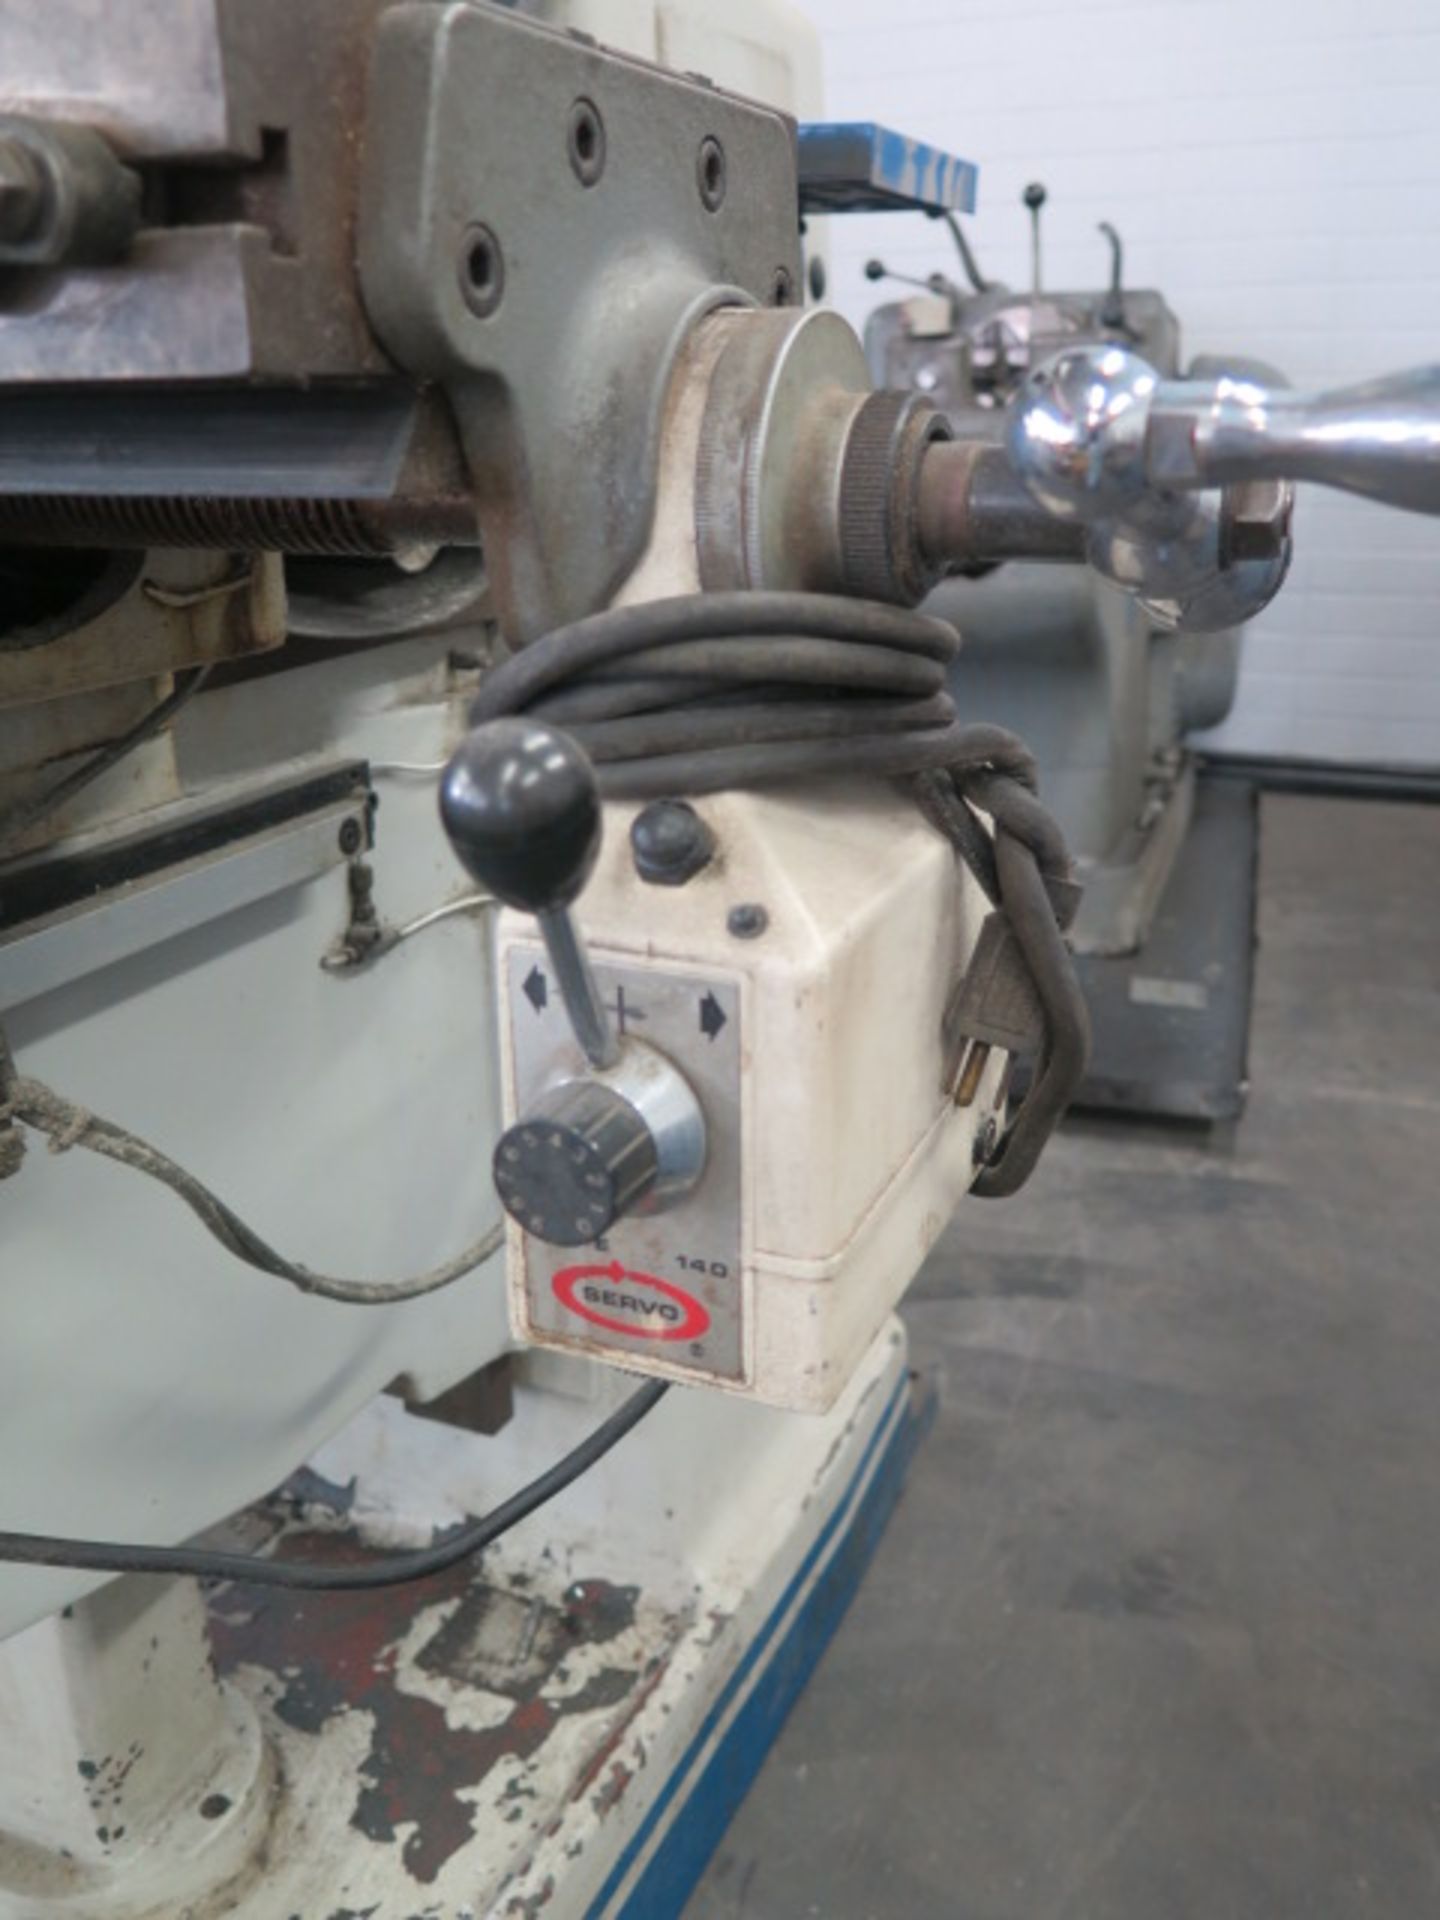 Acra AM-3 Vertical Mill s/n 961819 w/ Sargon 3-Axis DRO, 3Hp Motor, 60-4200 Dial RPM, Sold AS IS - Image 10 of 13